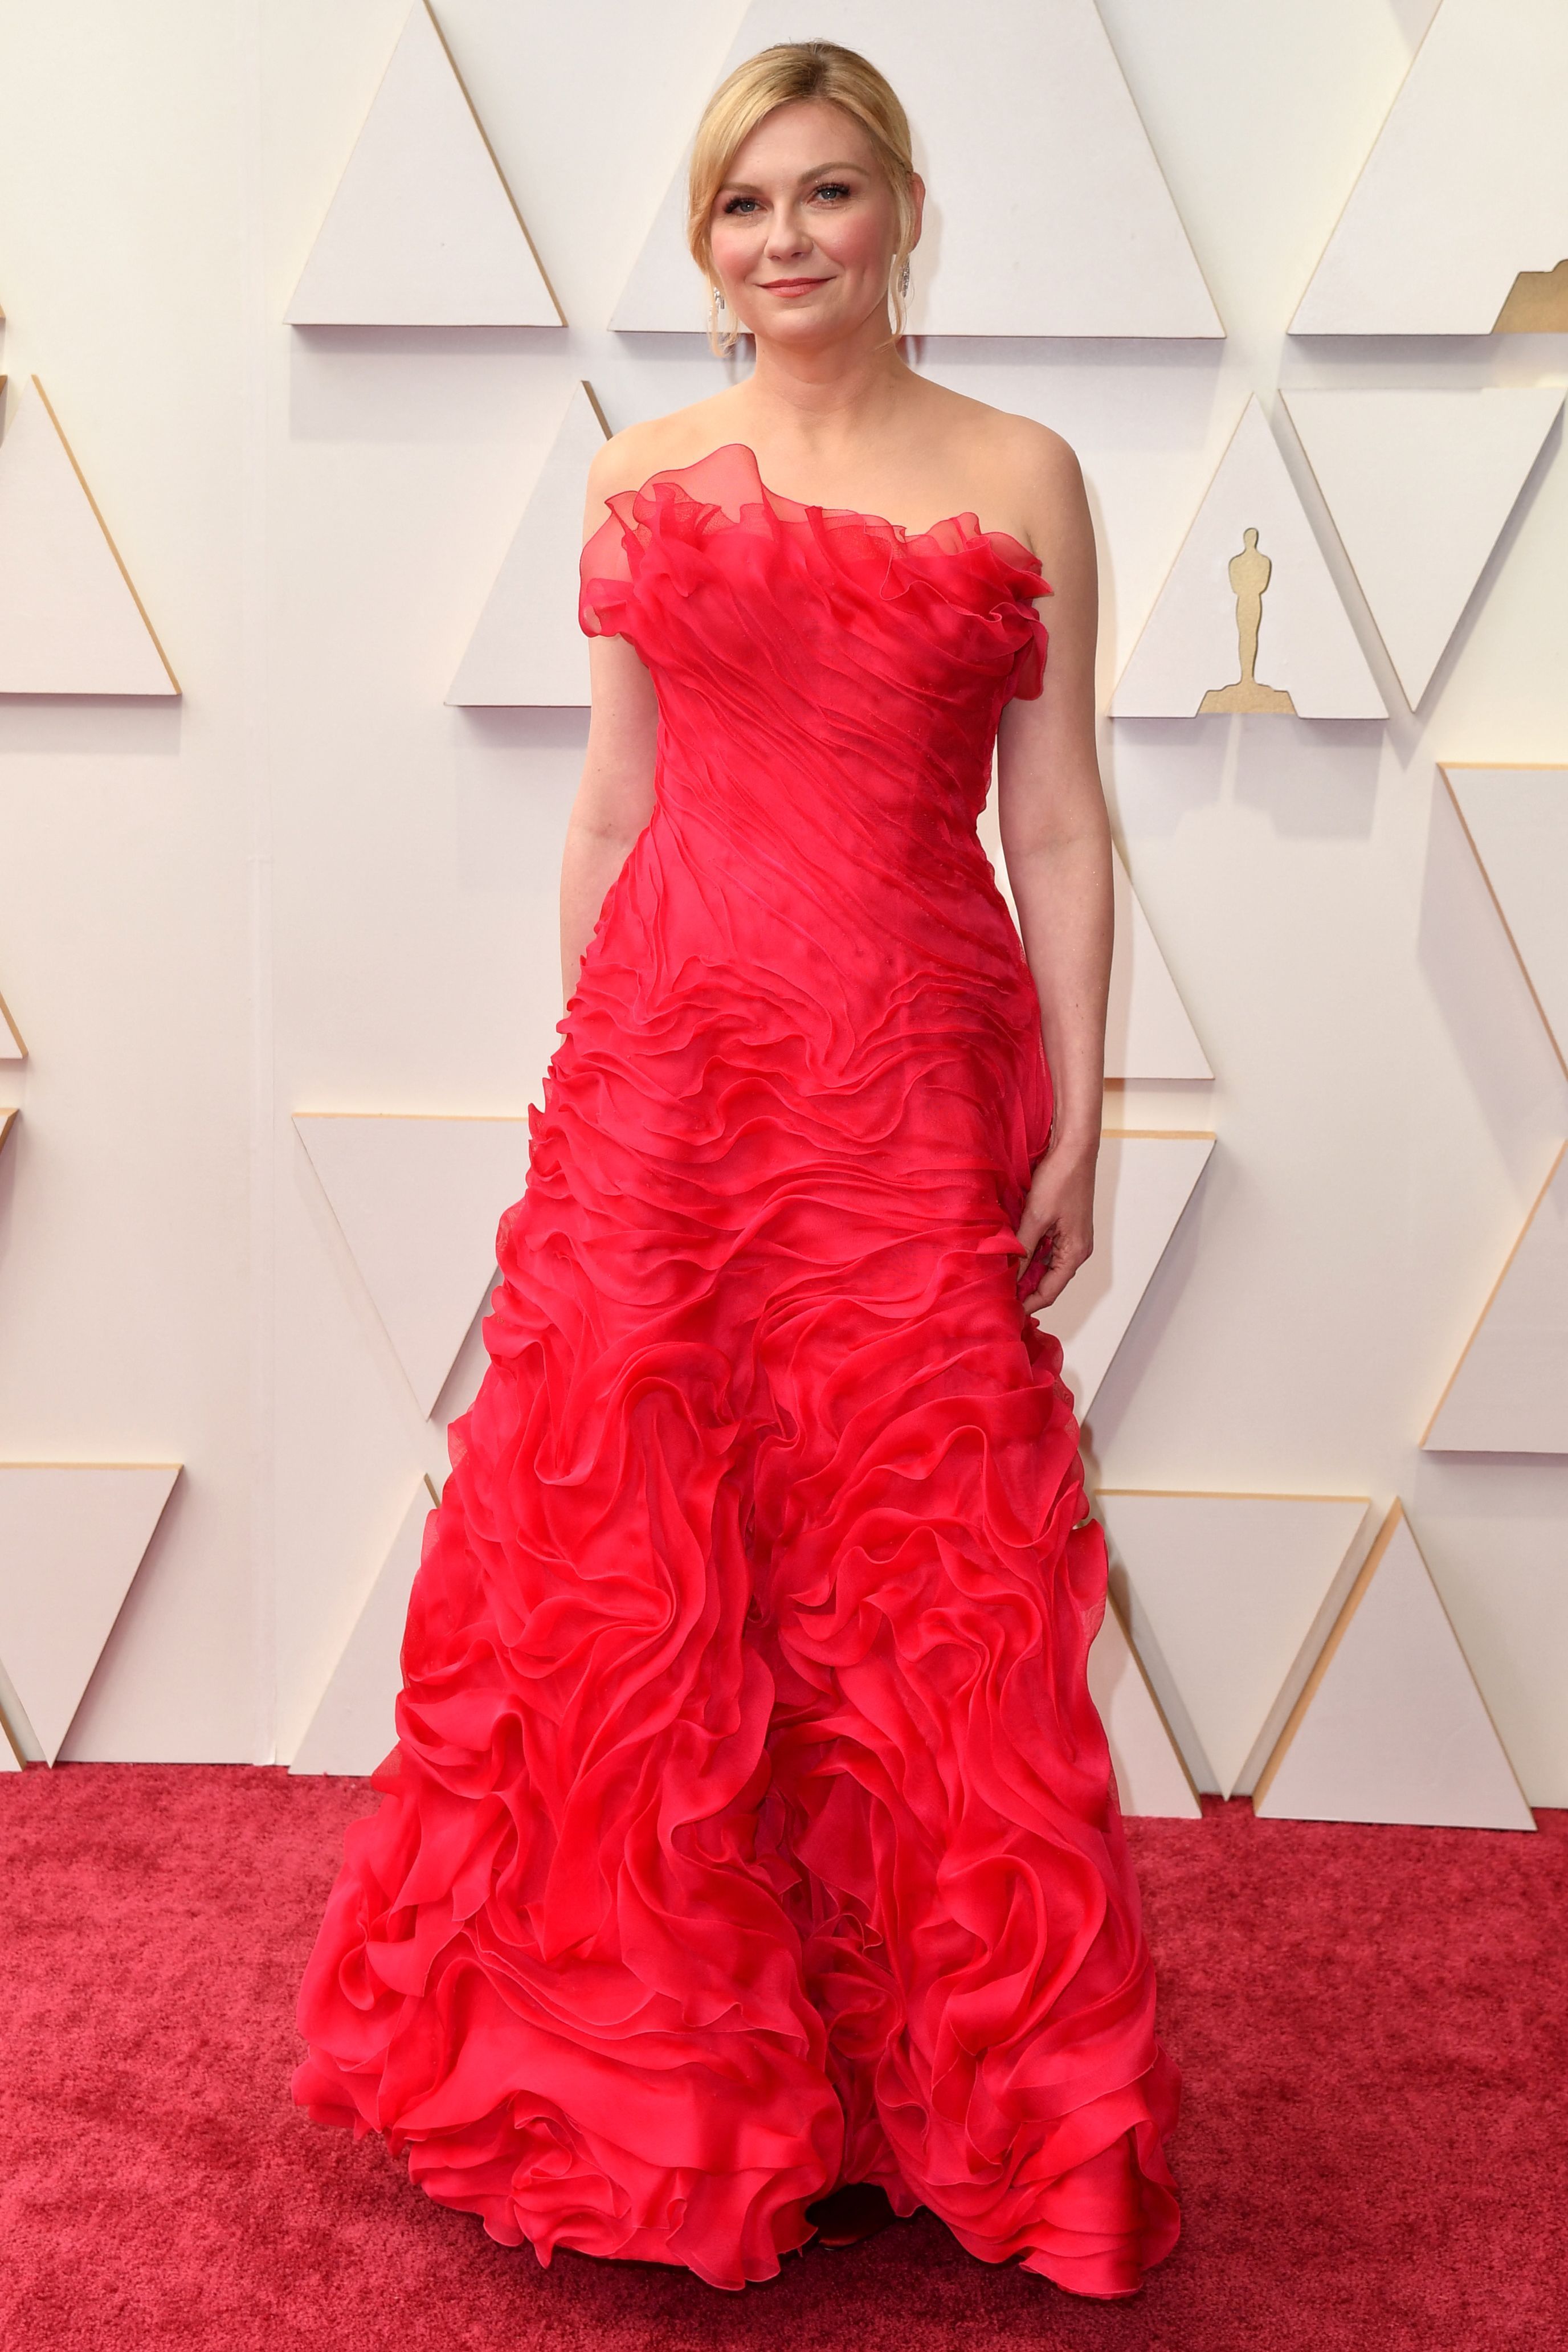 The Best Red Dresses at the Oscars 2022